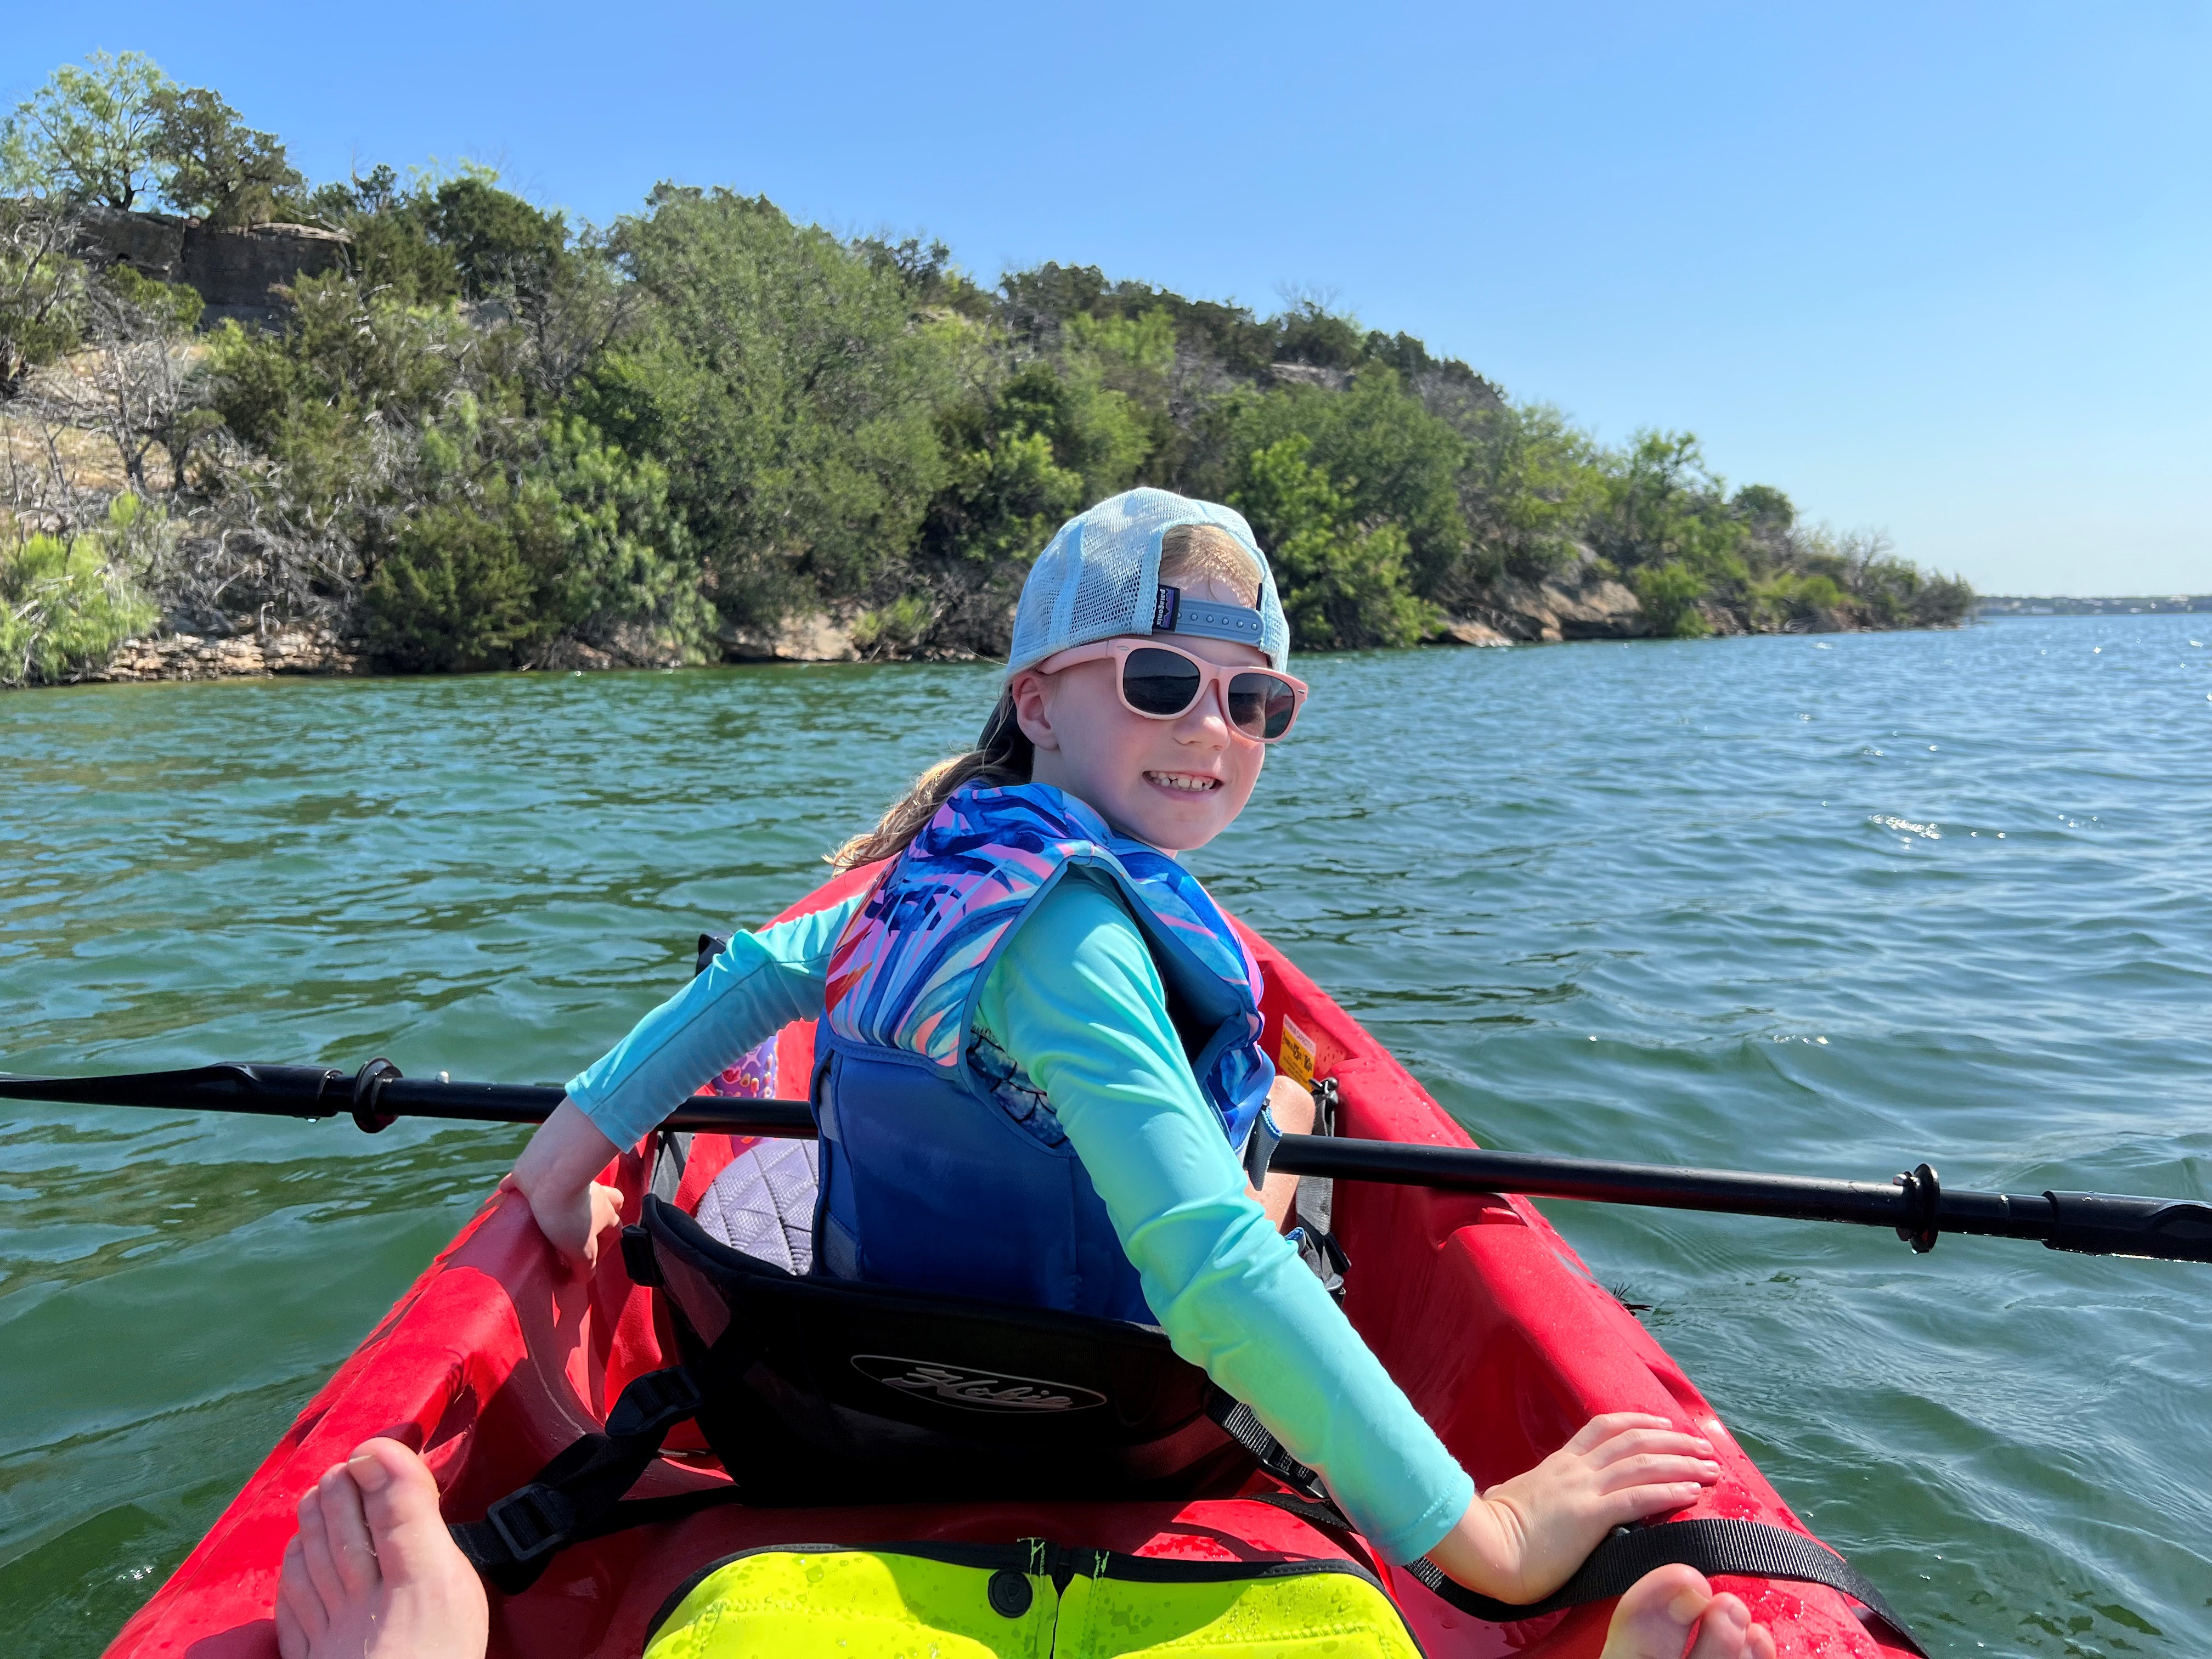 A girl smiling in a kayak on the lake